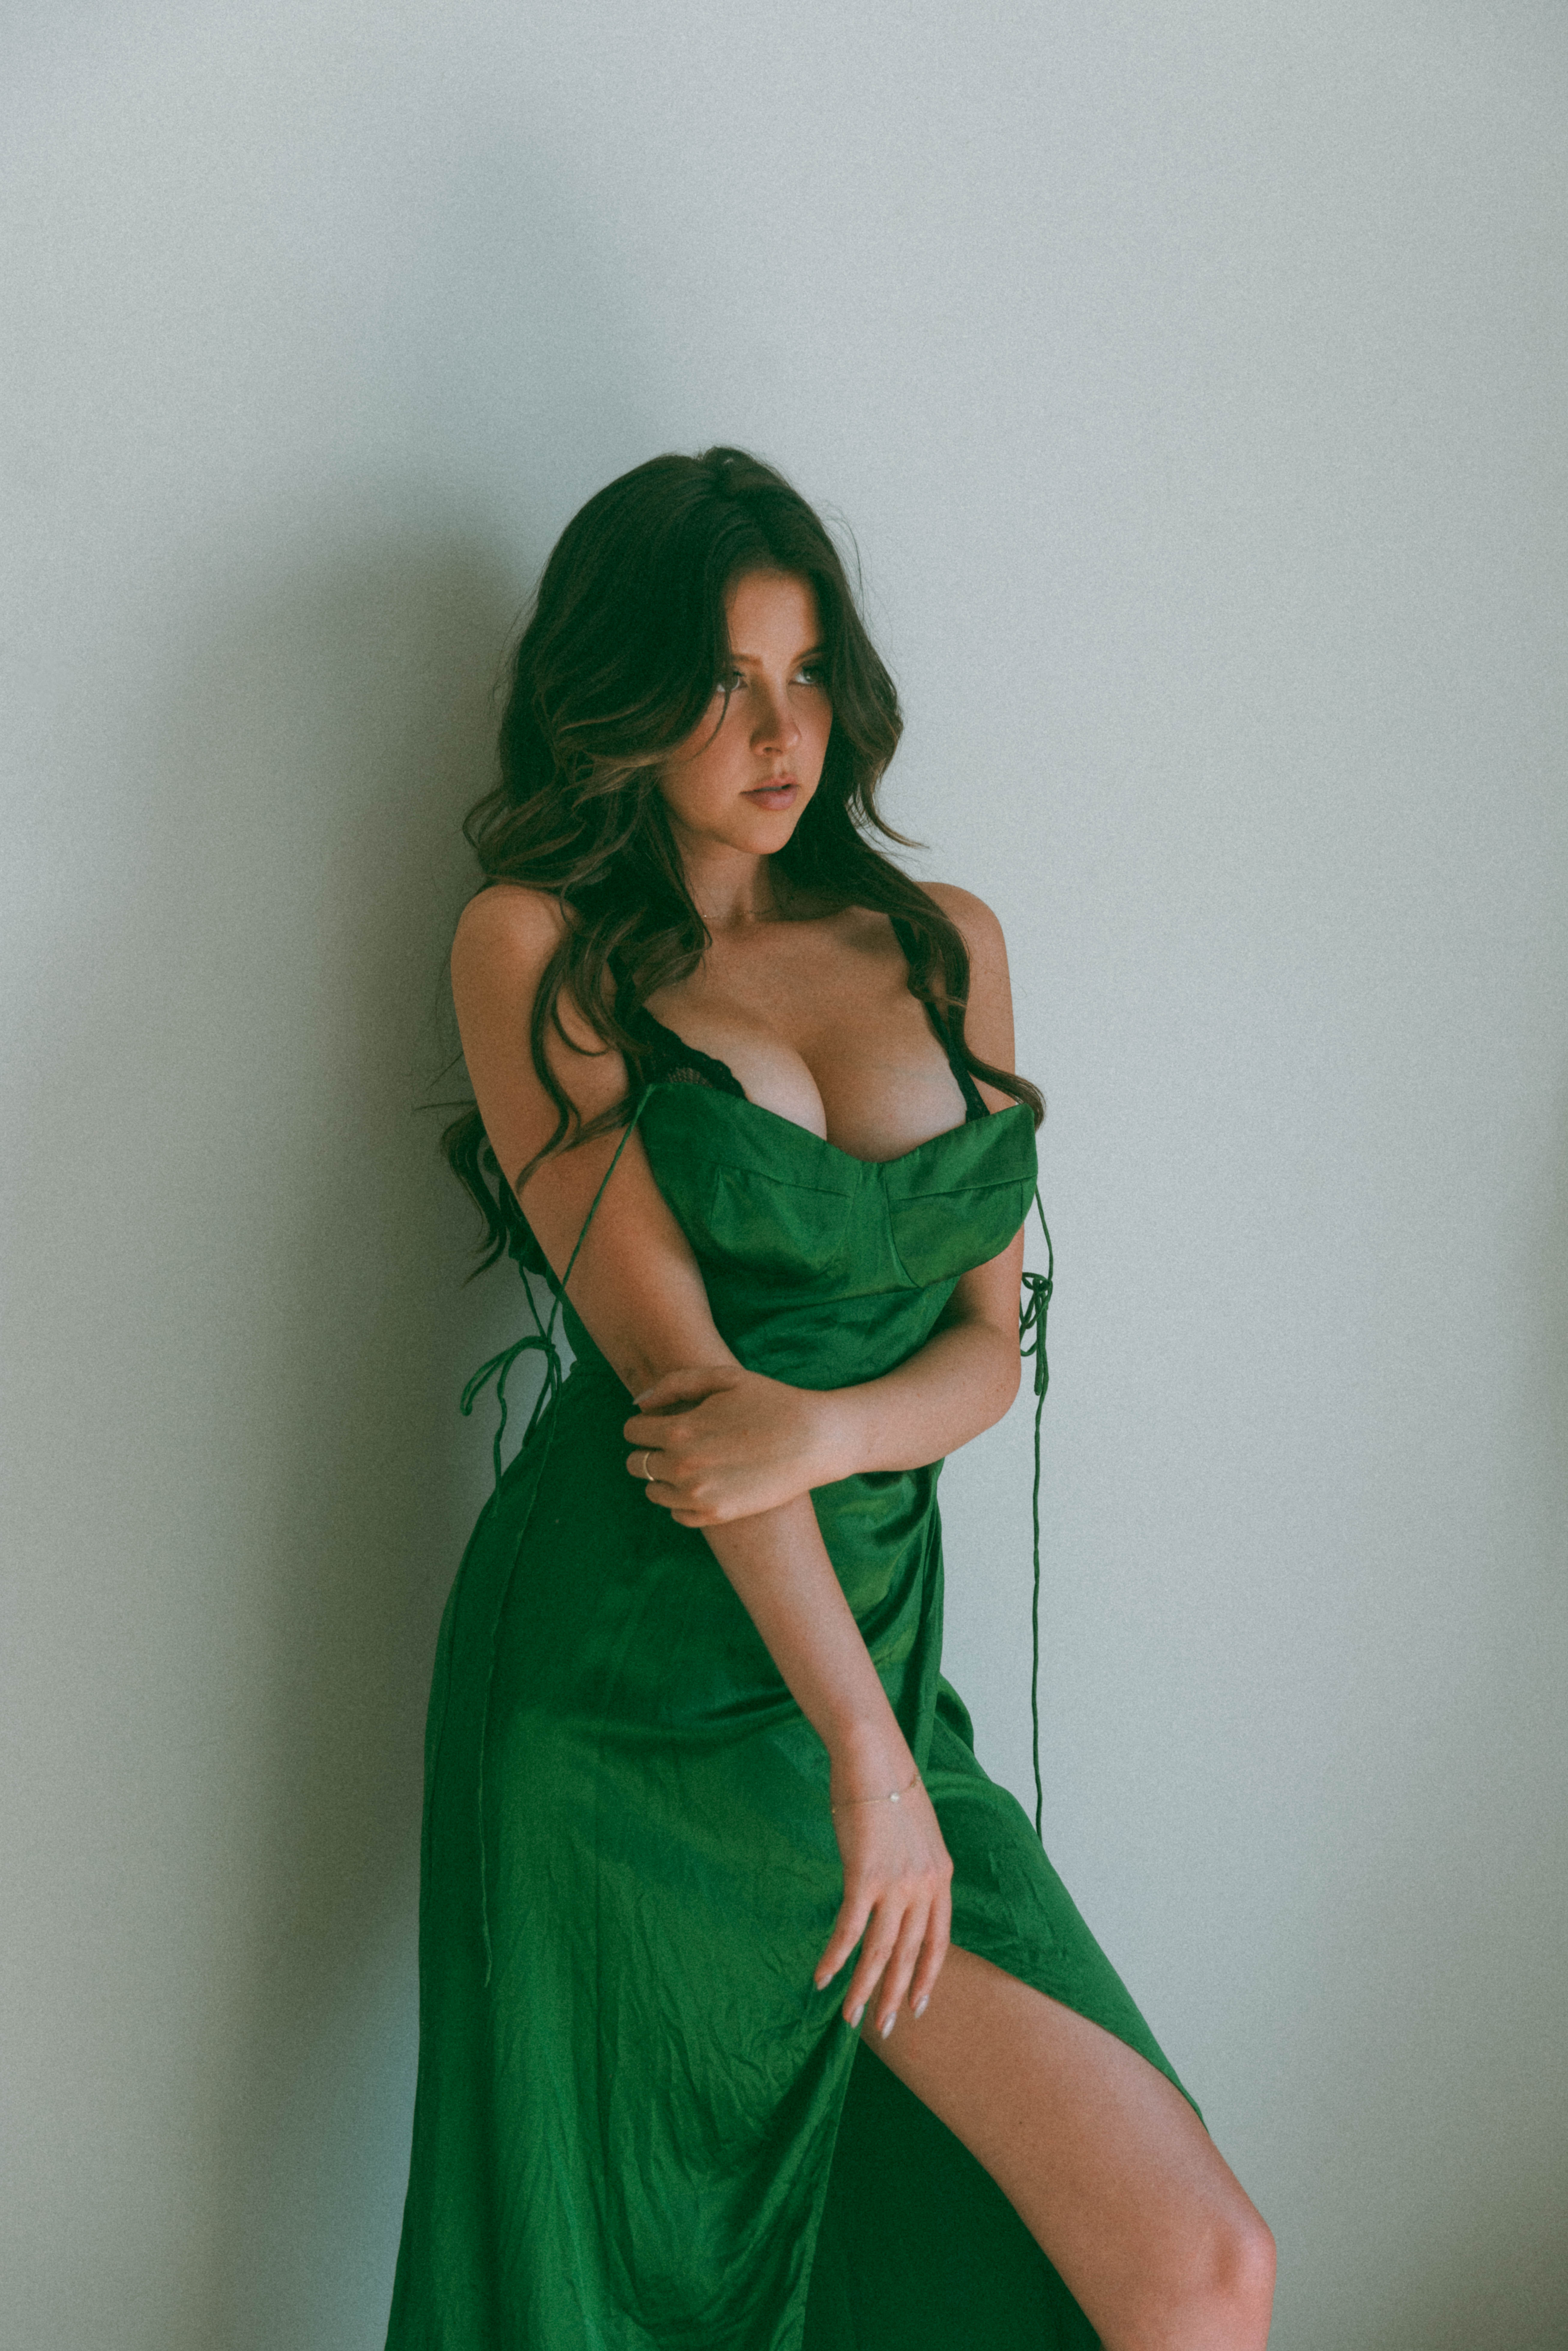 a woman standing and holding her arm while wearing a green dress during a boudoir session